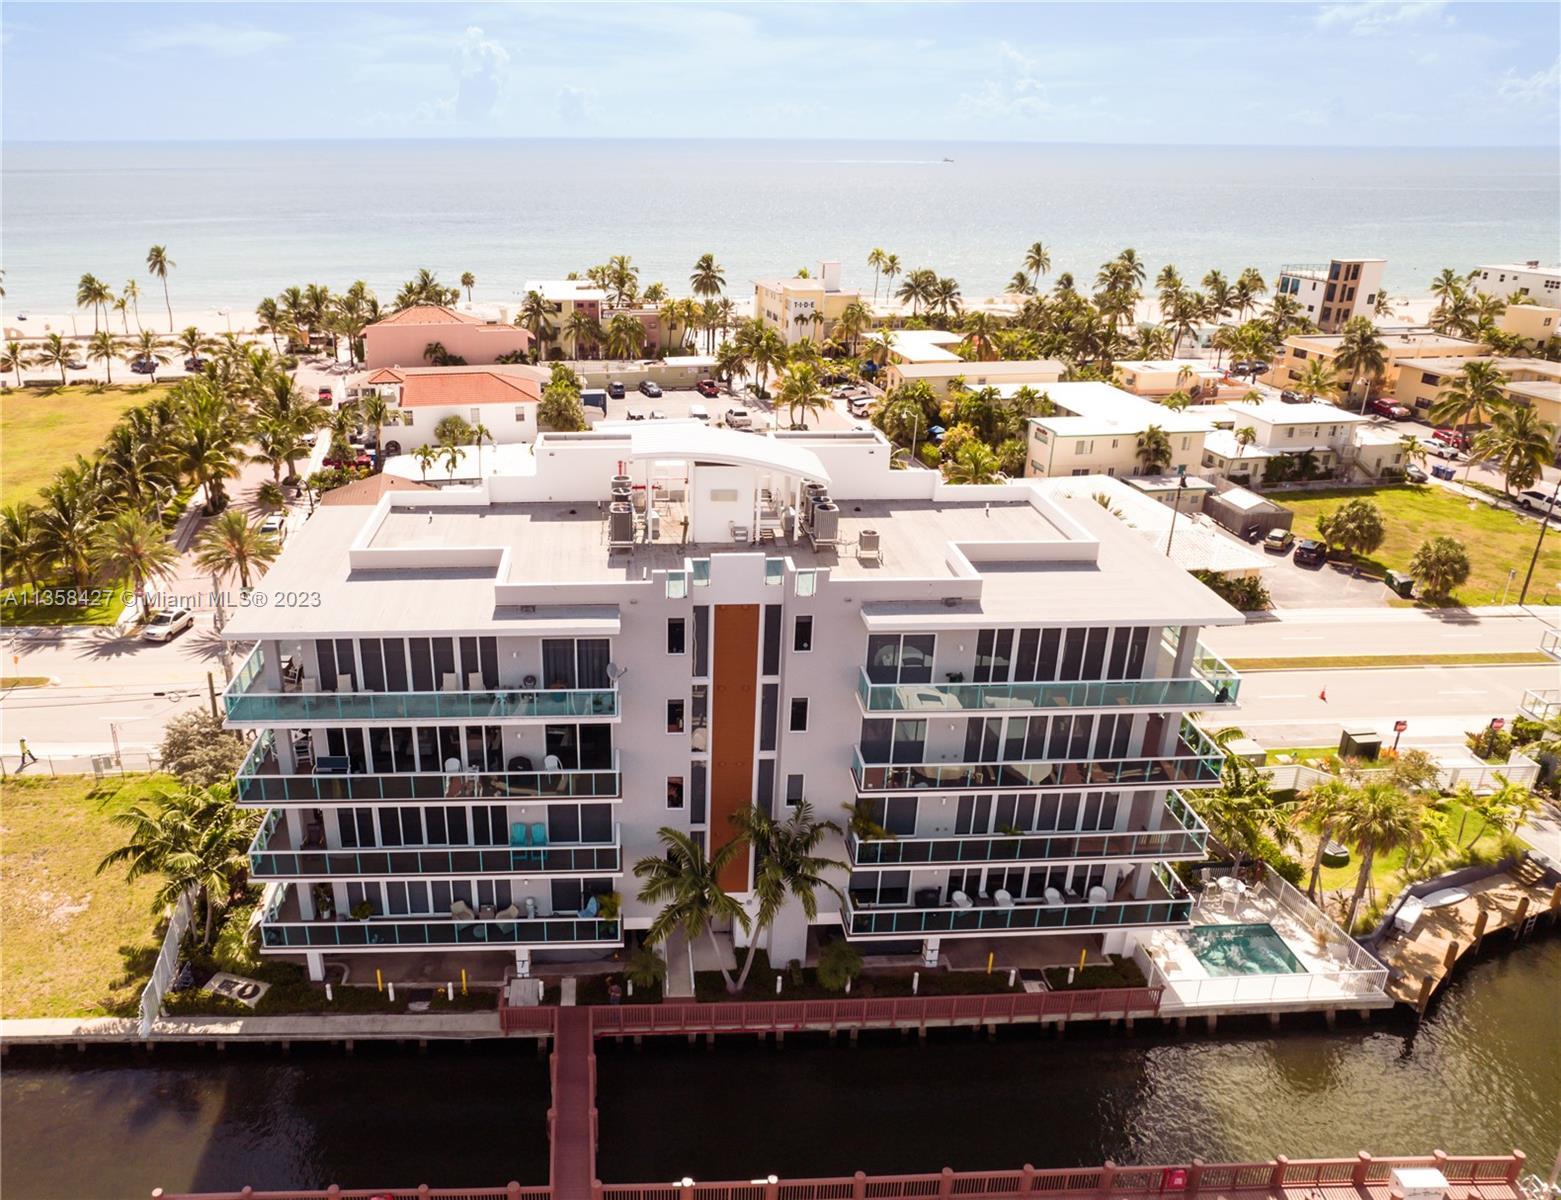 LUXURY WATERFRONT CONDO WITH 60' BOAT SLIP LOCATED IN THE HEART OF HOLLYWOOD BEACH. Sky Harbor is an